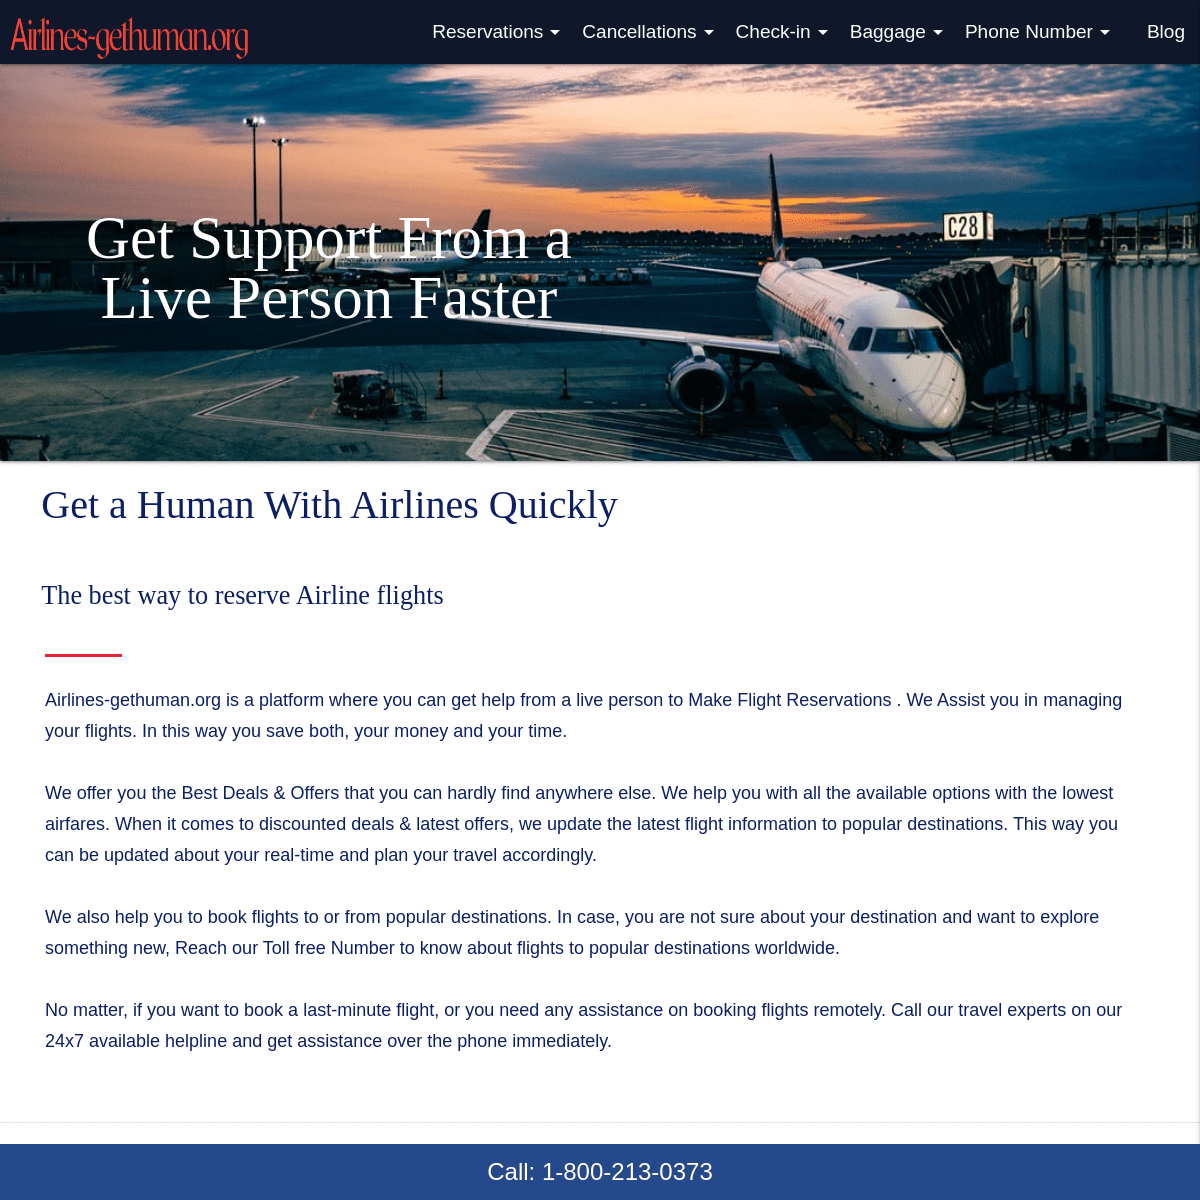 A complete backup of https://airlines-gethuman.org